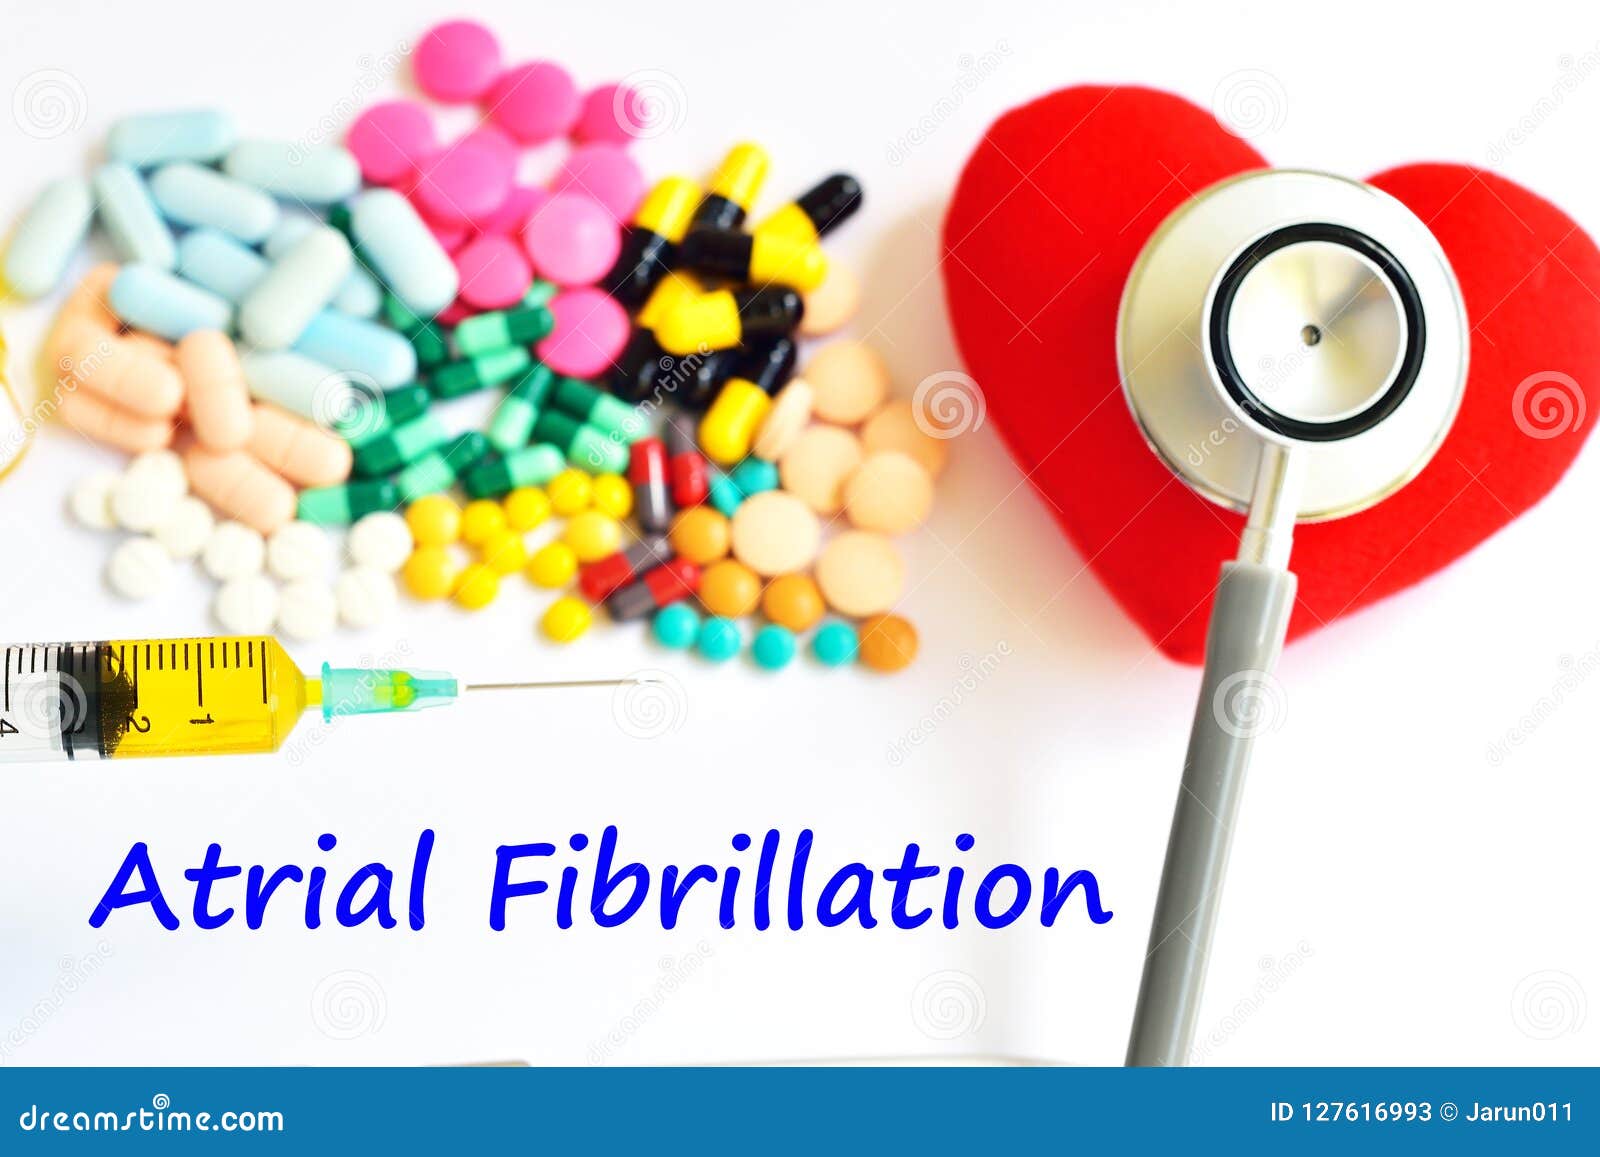 what drugs can cause atrial fibrillation